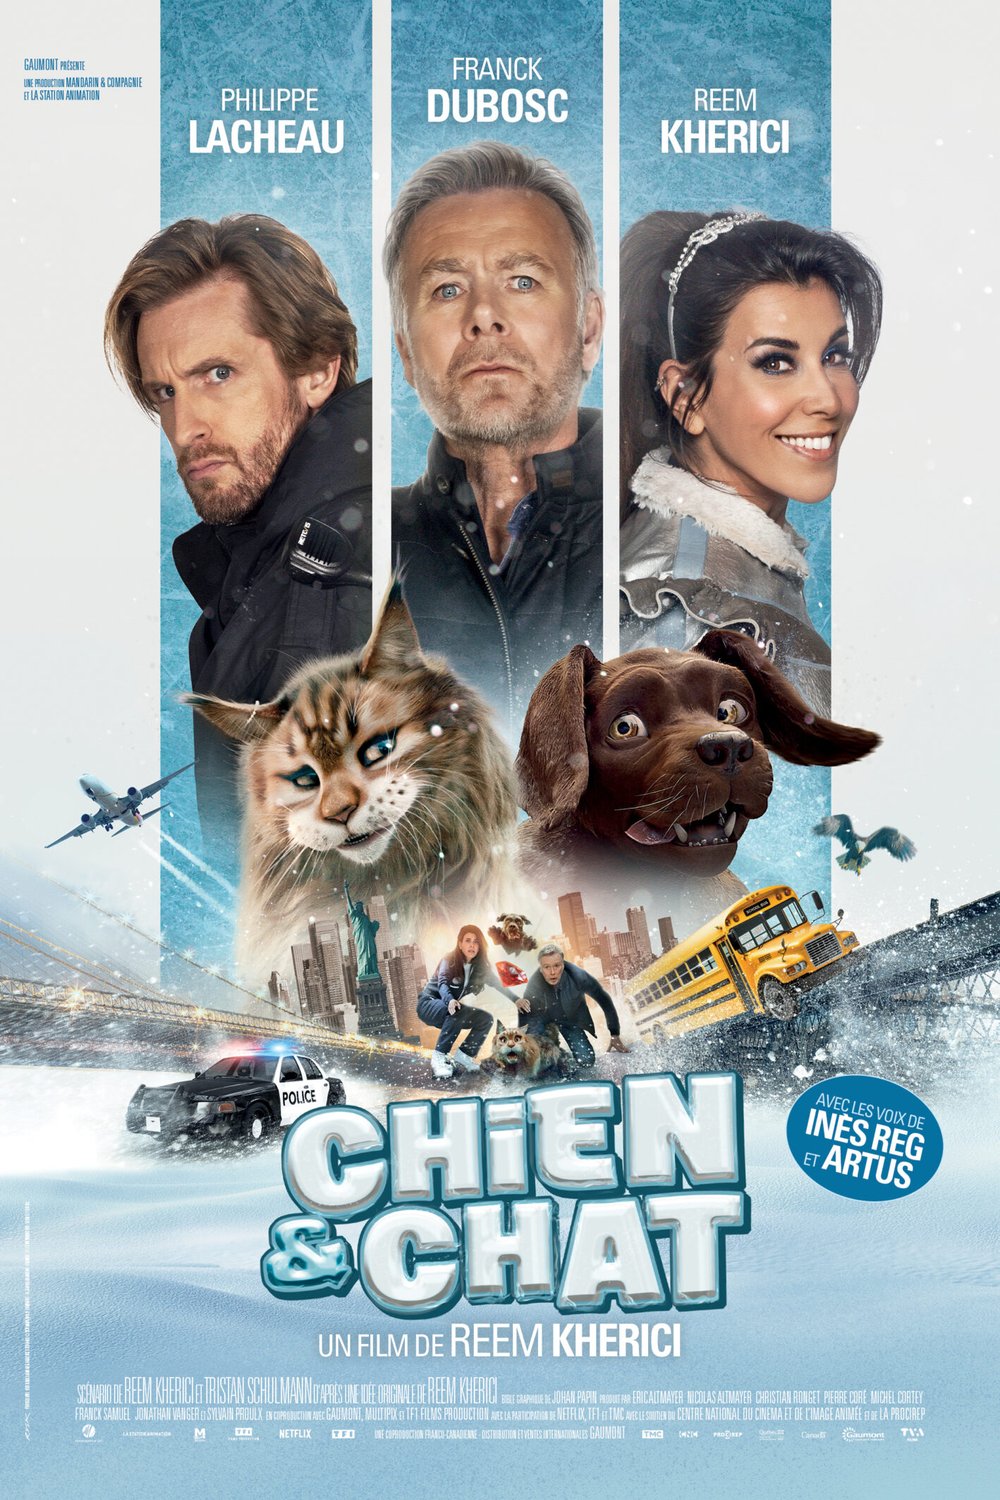 Poster of the movie Chien et chat